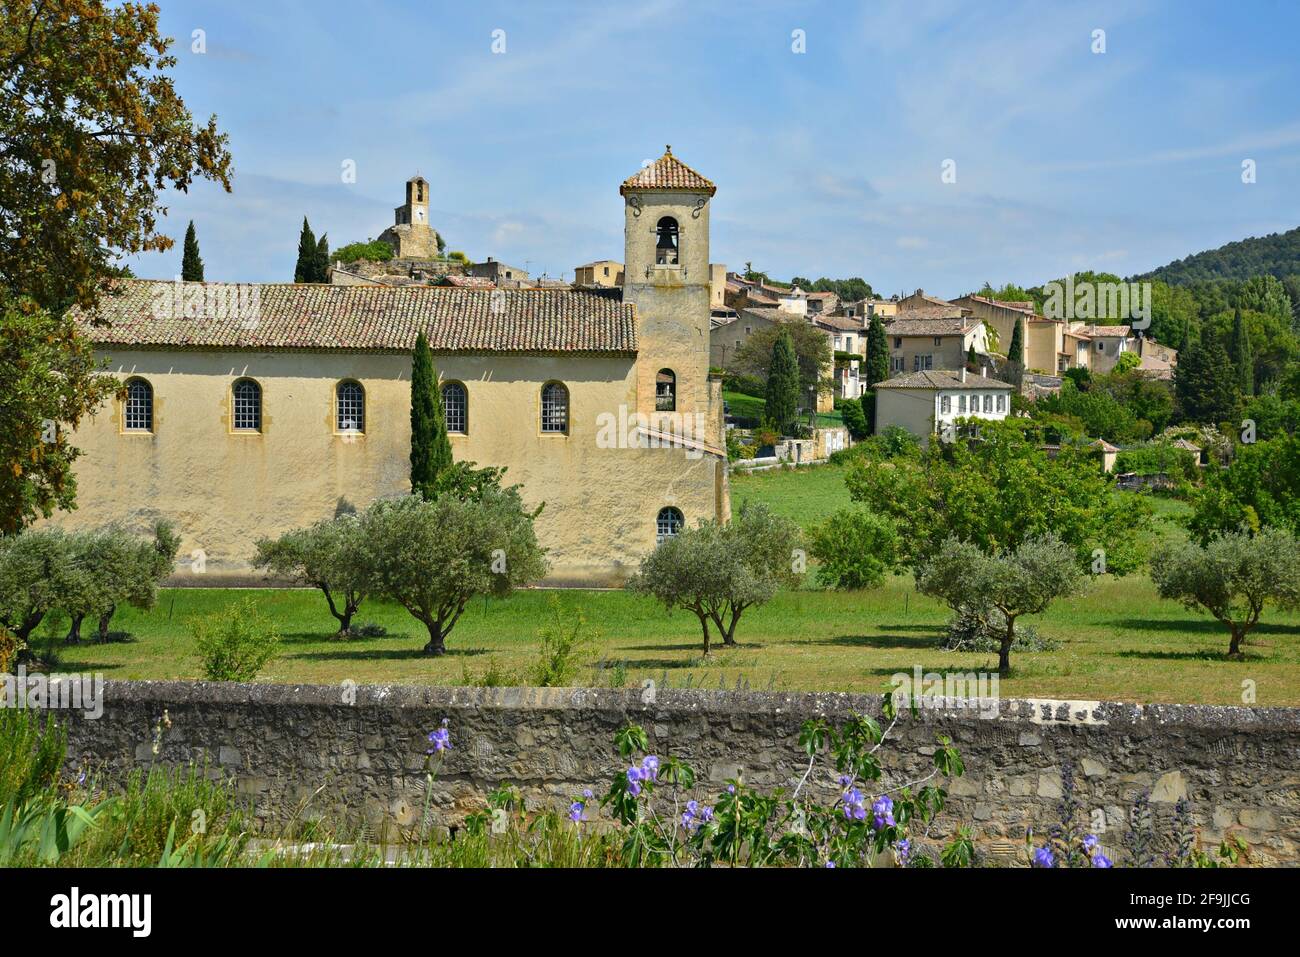 Landscape with scenic view of the Protestant Temple and Provençal style rural houses in the picturesque village of Lourmarin Vaucluse Provence France. Stock Photo